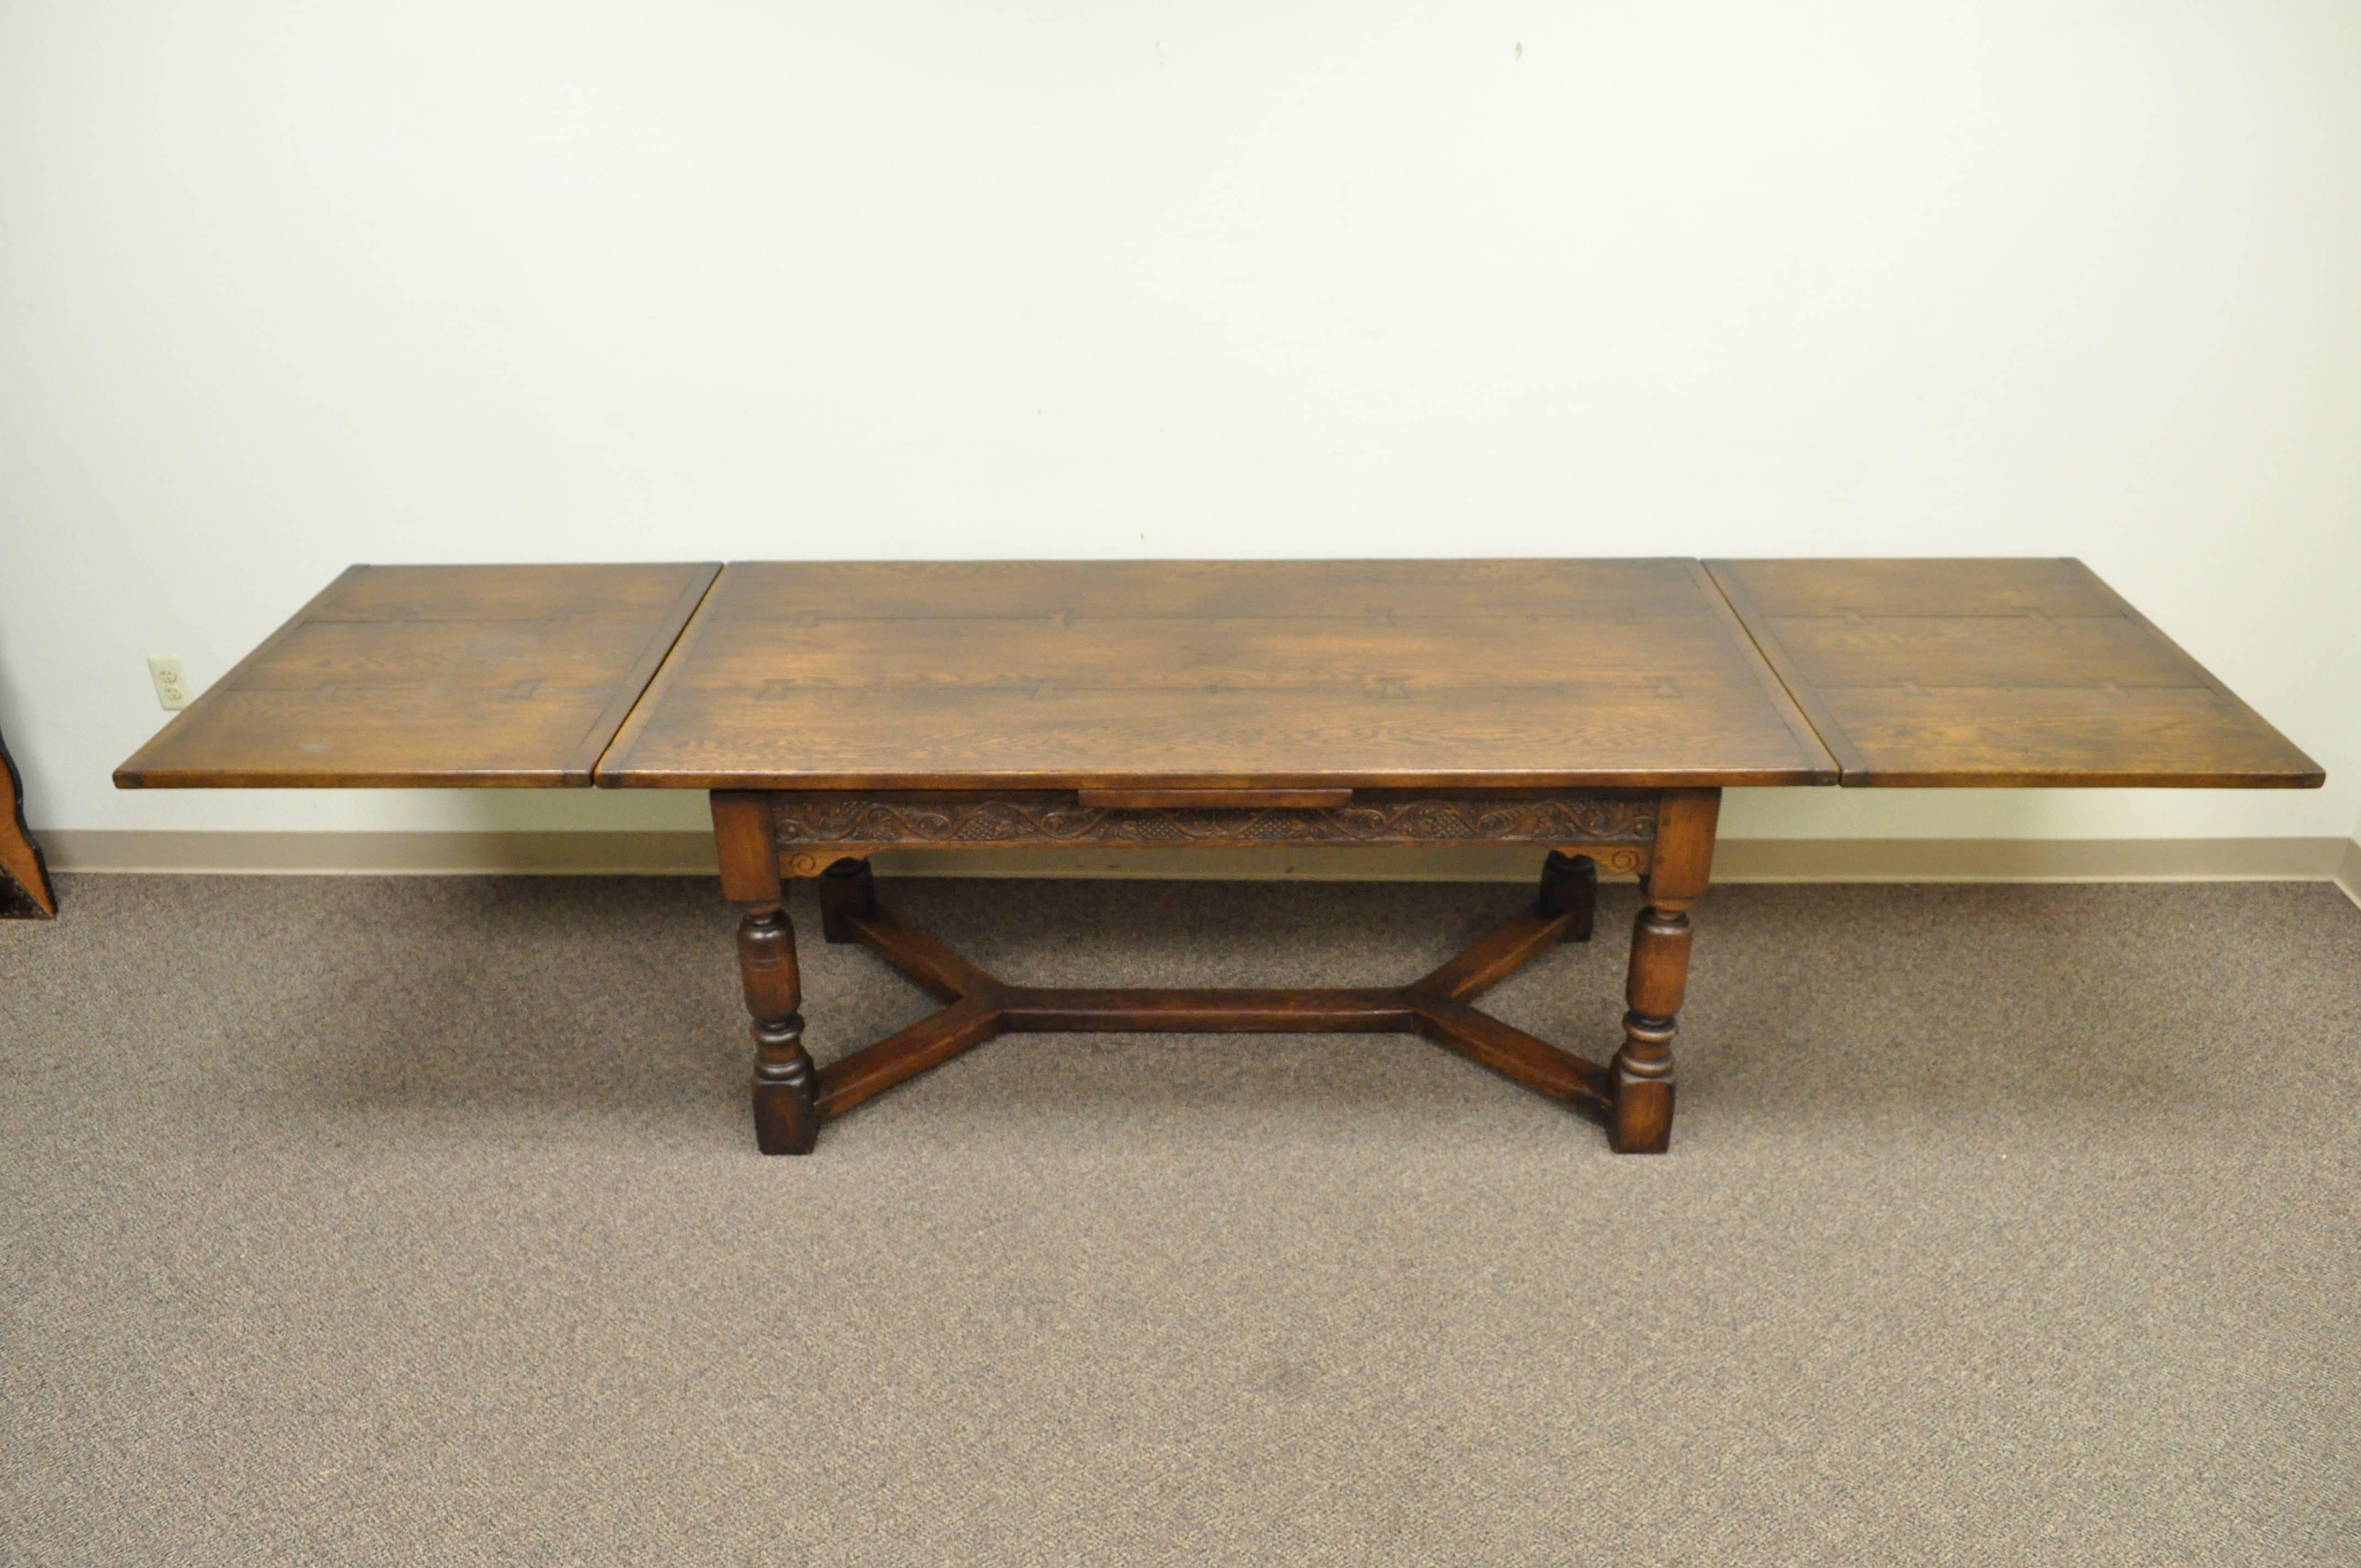 Beautiful English, Solid Oak, Jacobean Style Extension Dining Table. Item features two pull out extension leaves, ornately carved skirt, stretcher supported base, turned legs, decorative buttefly/bowtie joints on the top, and great overall form.